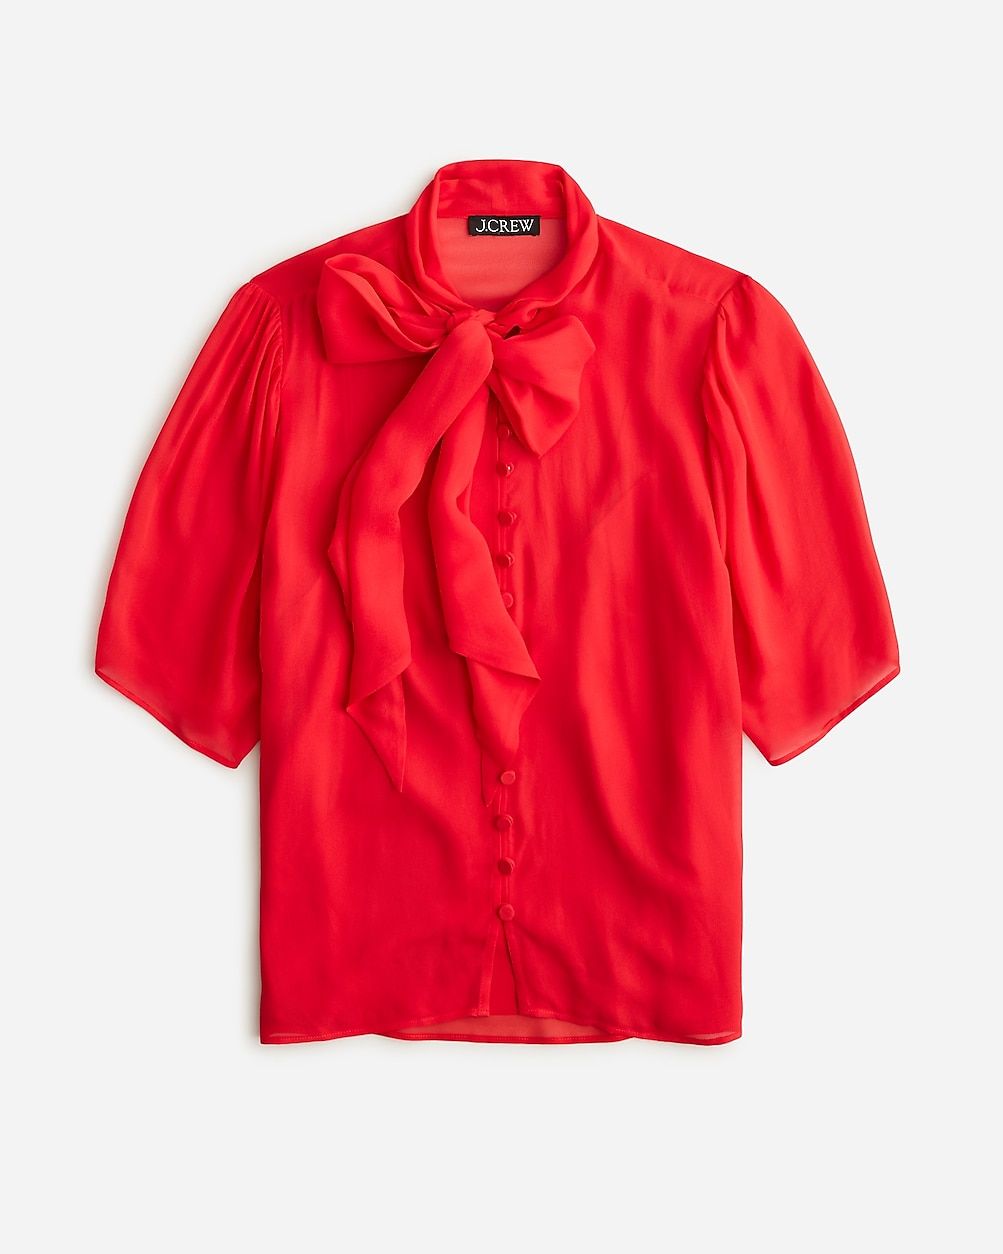 Tie-neck button-up top in sheer chiffon | J.Crew US